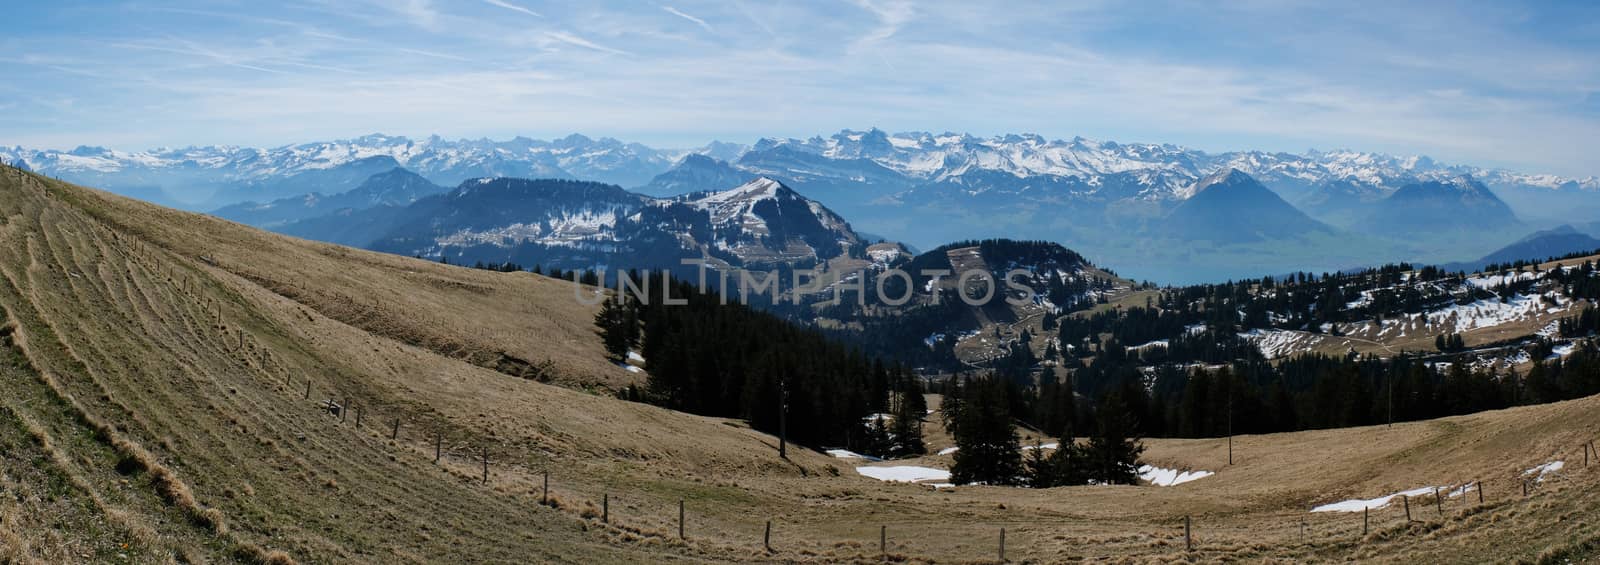 Panoramic view alps from Rigi Kulm (Summit of Mount Rigi, Queen of the Mountains) Switzerland